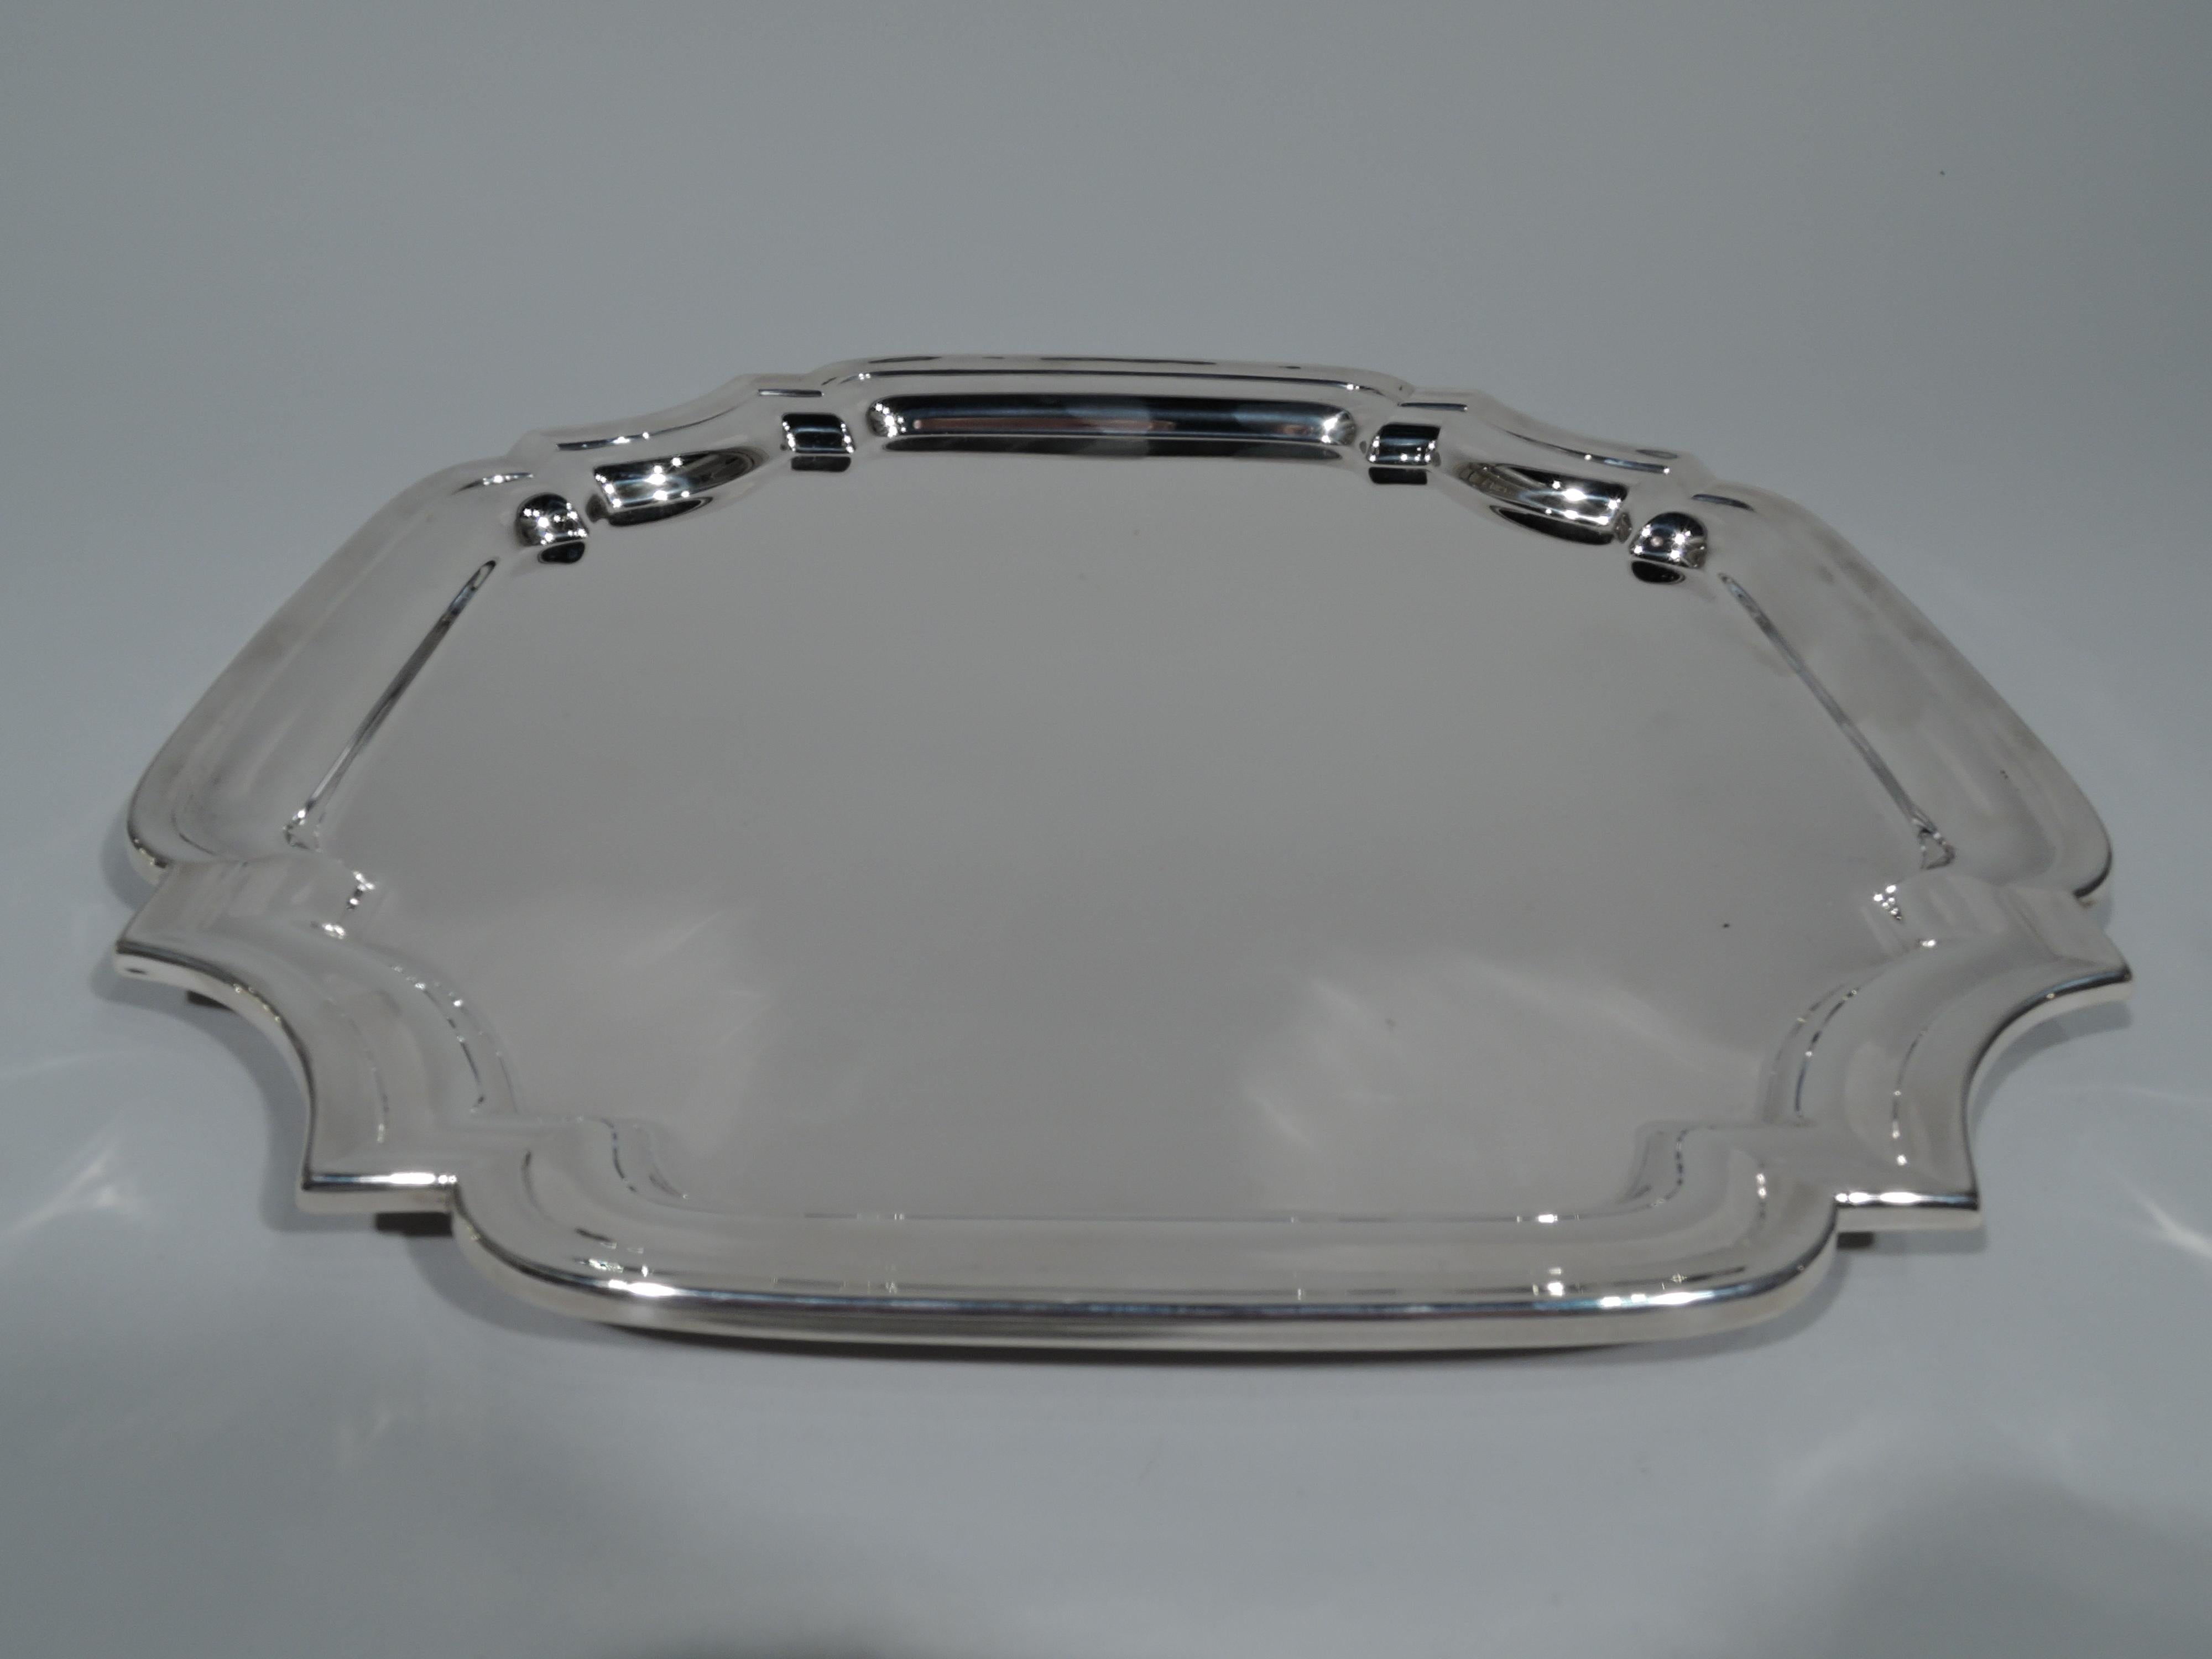 Georgian style sterling silver tray. Made by Lunt in Greenfield, Mass. Four curved sides and curvilinear concave corners. Molded rim. A nice traditional serving piece. Fully marked including no. S4S. Weight: 23.5 troy ounces.